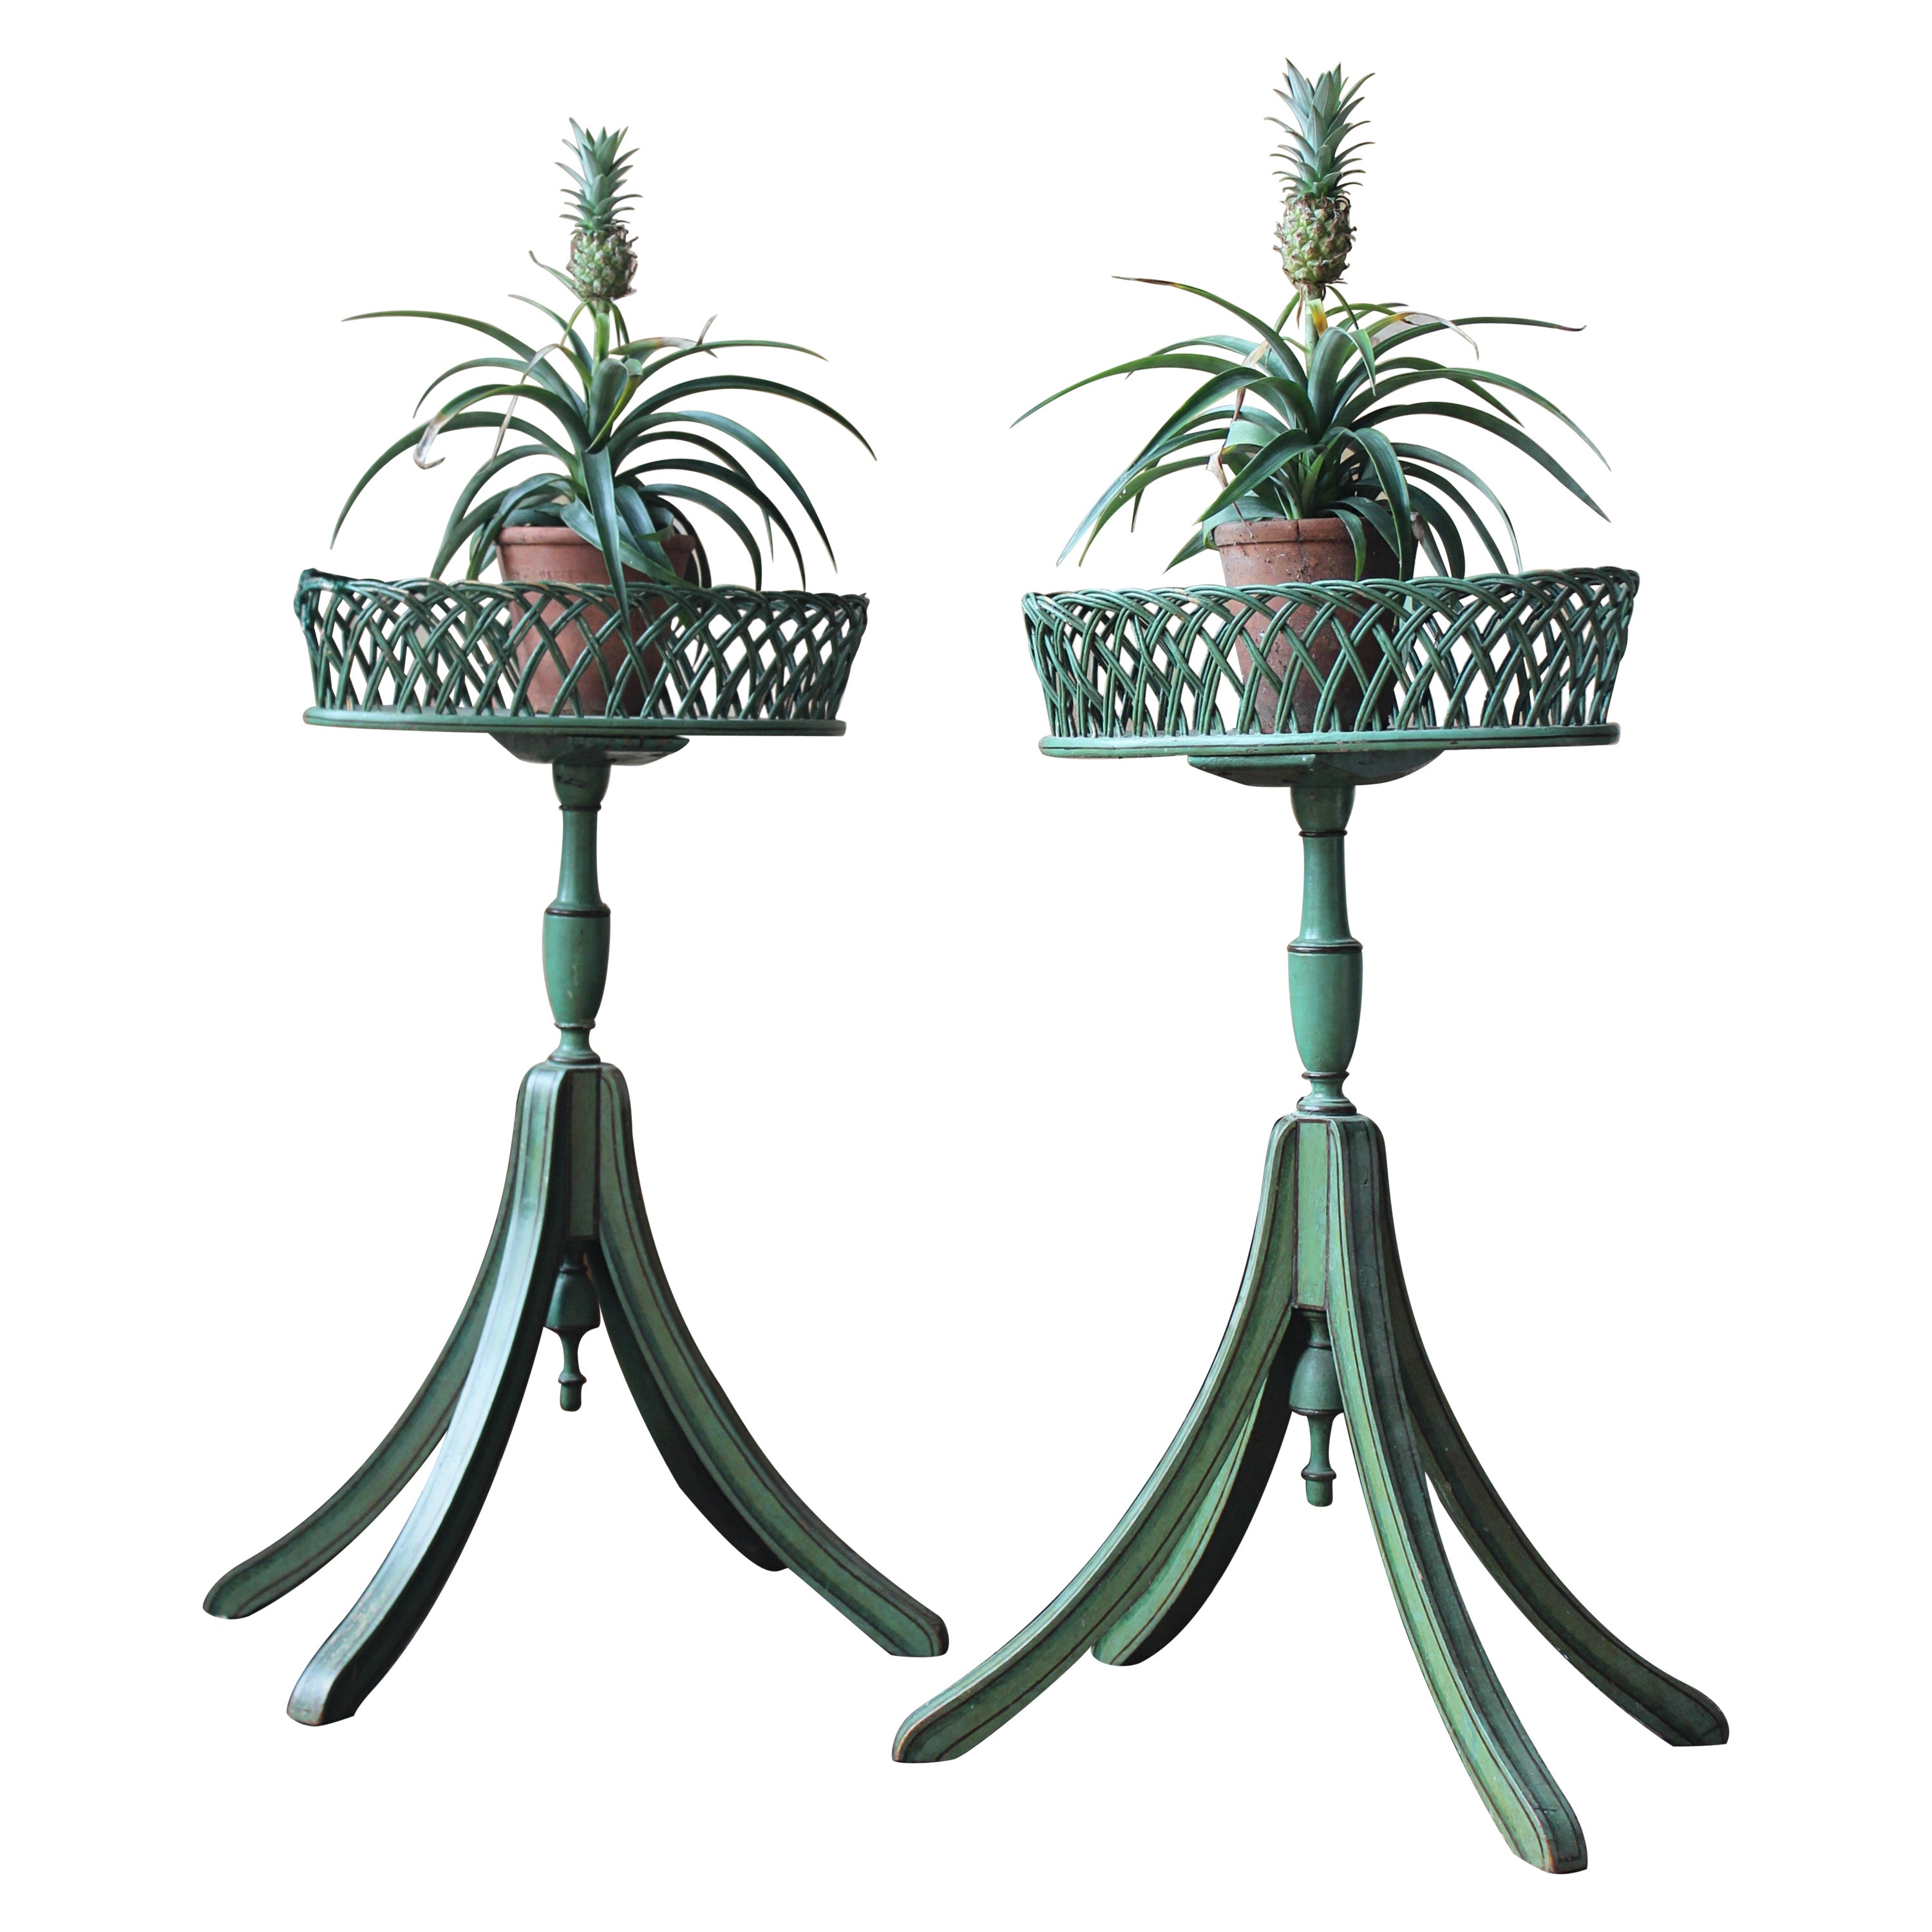 Early 20th C Pair of Regency Style Mist Green Pine & Wicker Jardinieres Planters For Sale